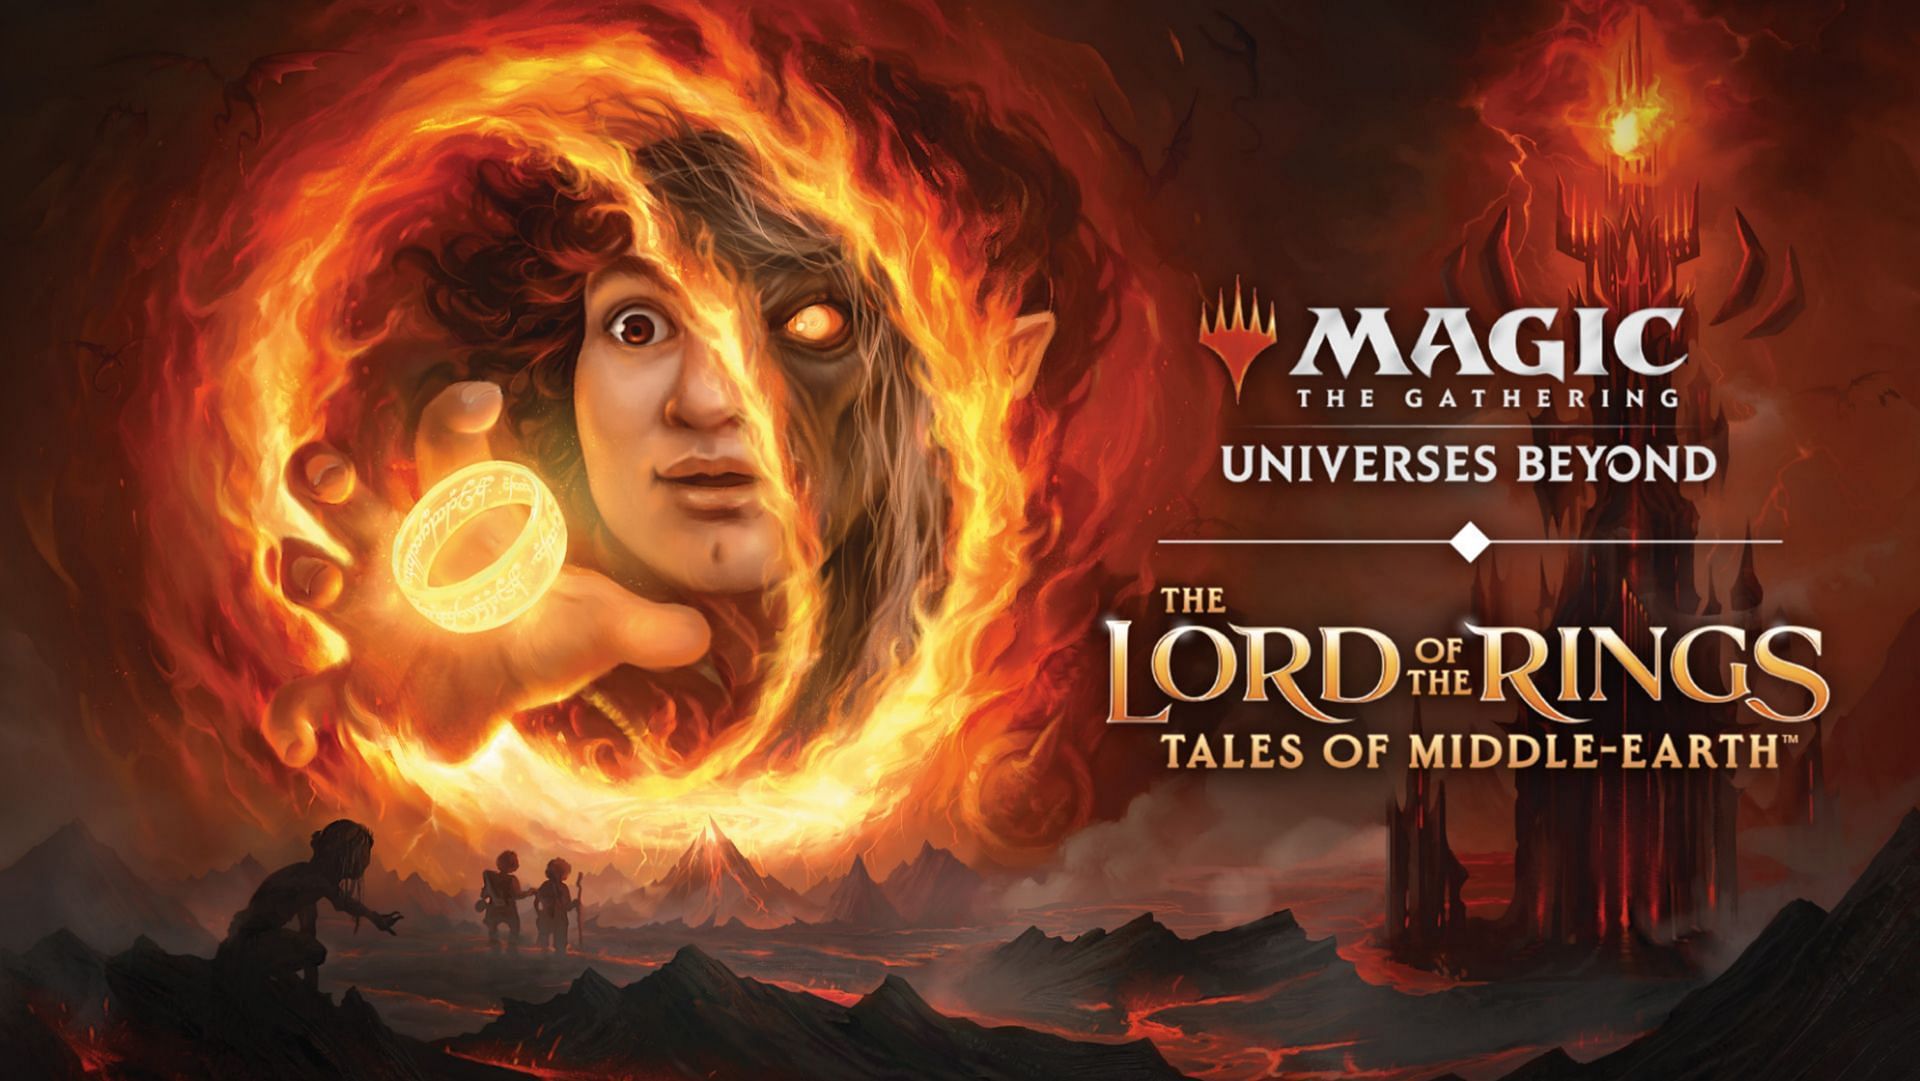 The Lord Of The Rings' universe expands to anime